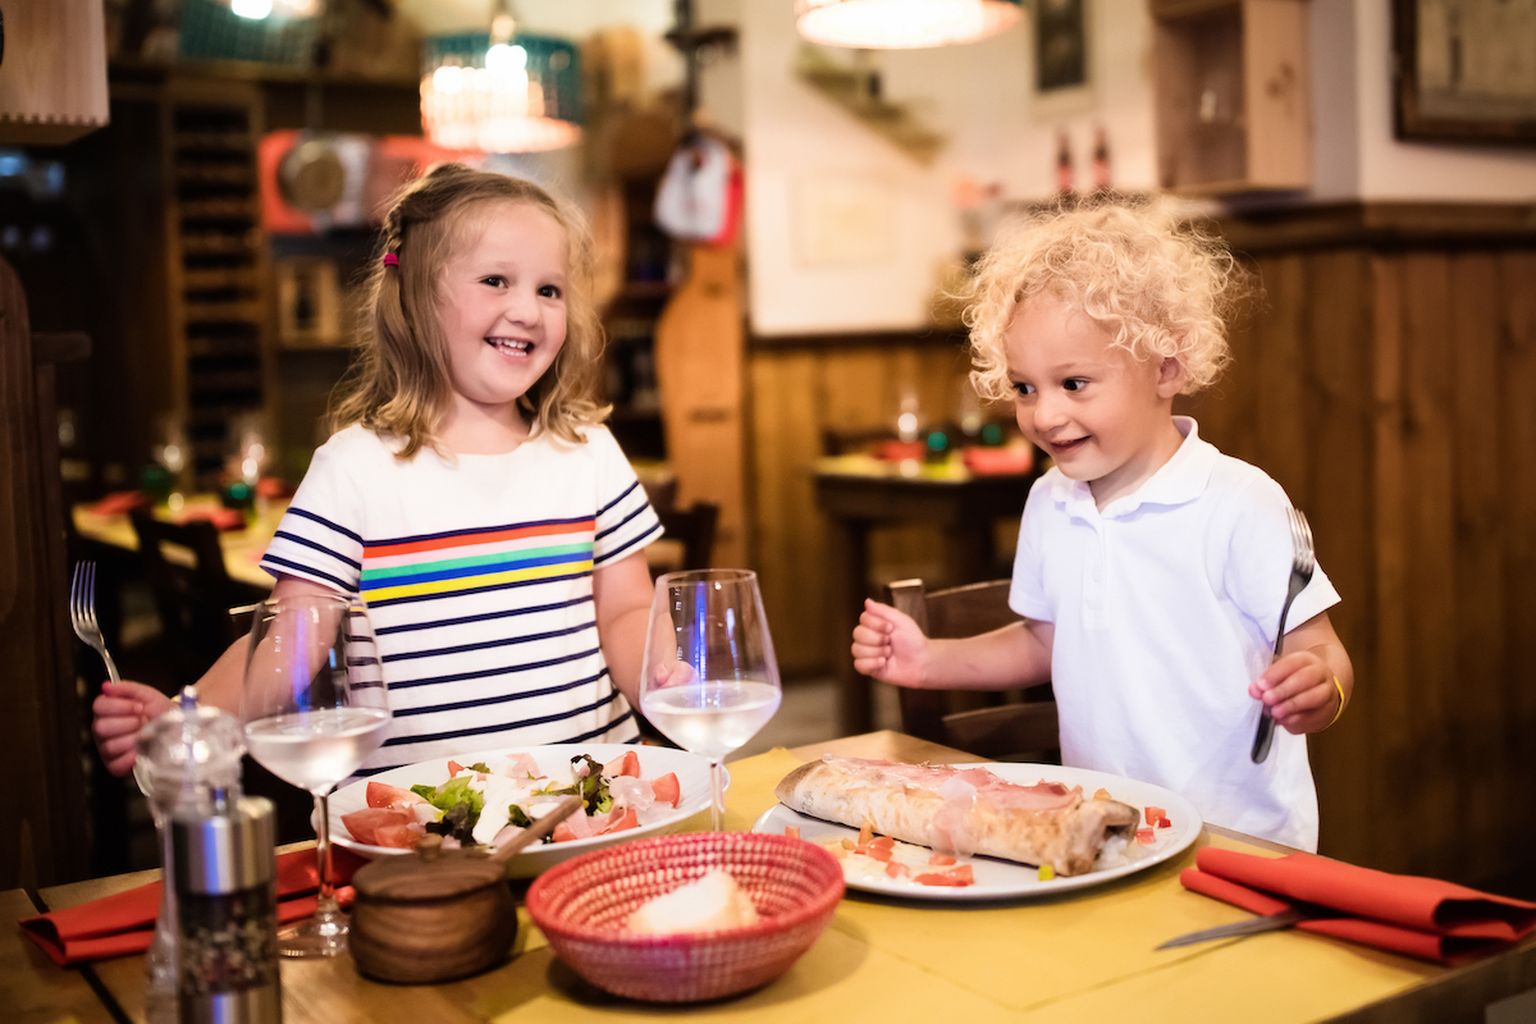 Kids eat pizza, pasta and salad in traditional restaurant.  Eating out with children. Boy and girl having dinner in pizzeria in Italy on vacation in Europe. Italian food and cuisine for family.